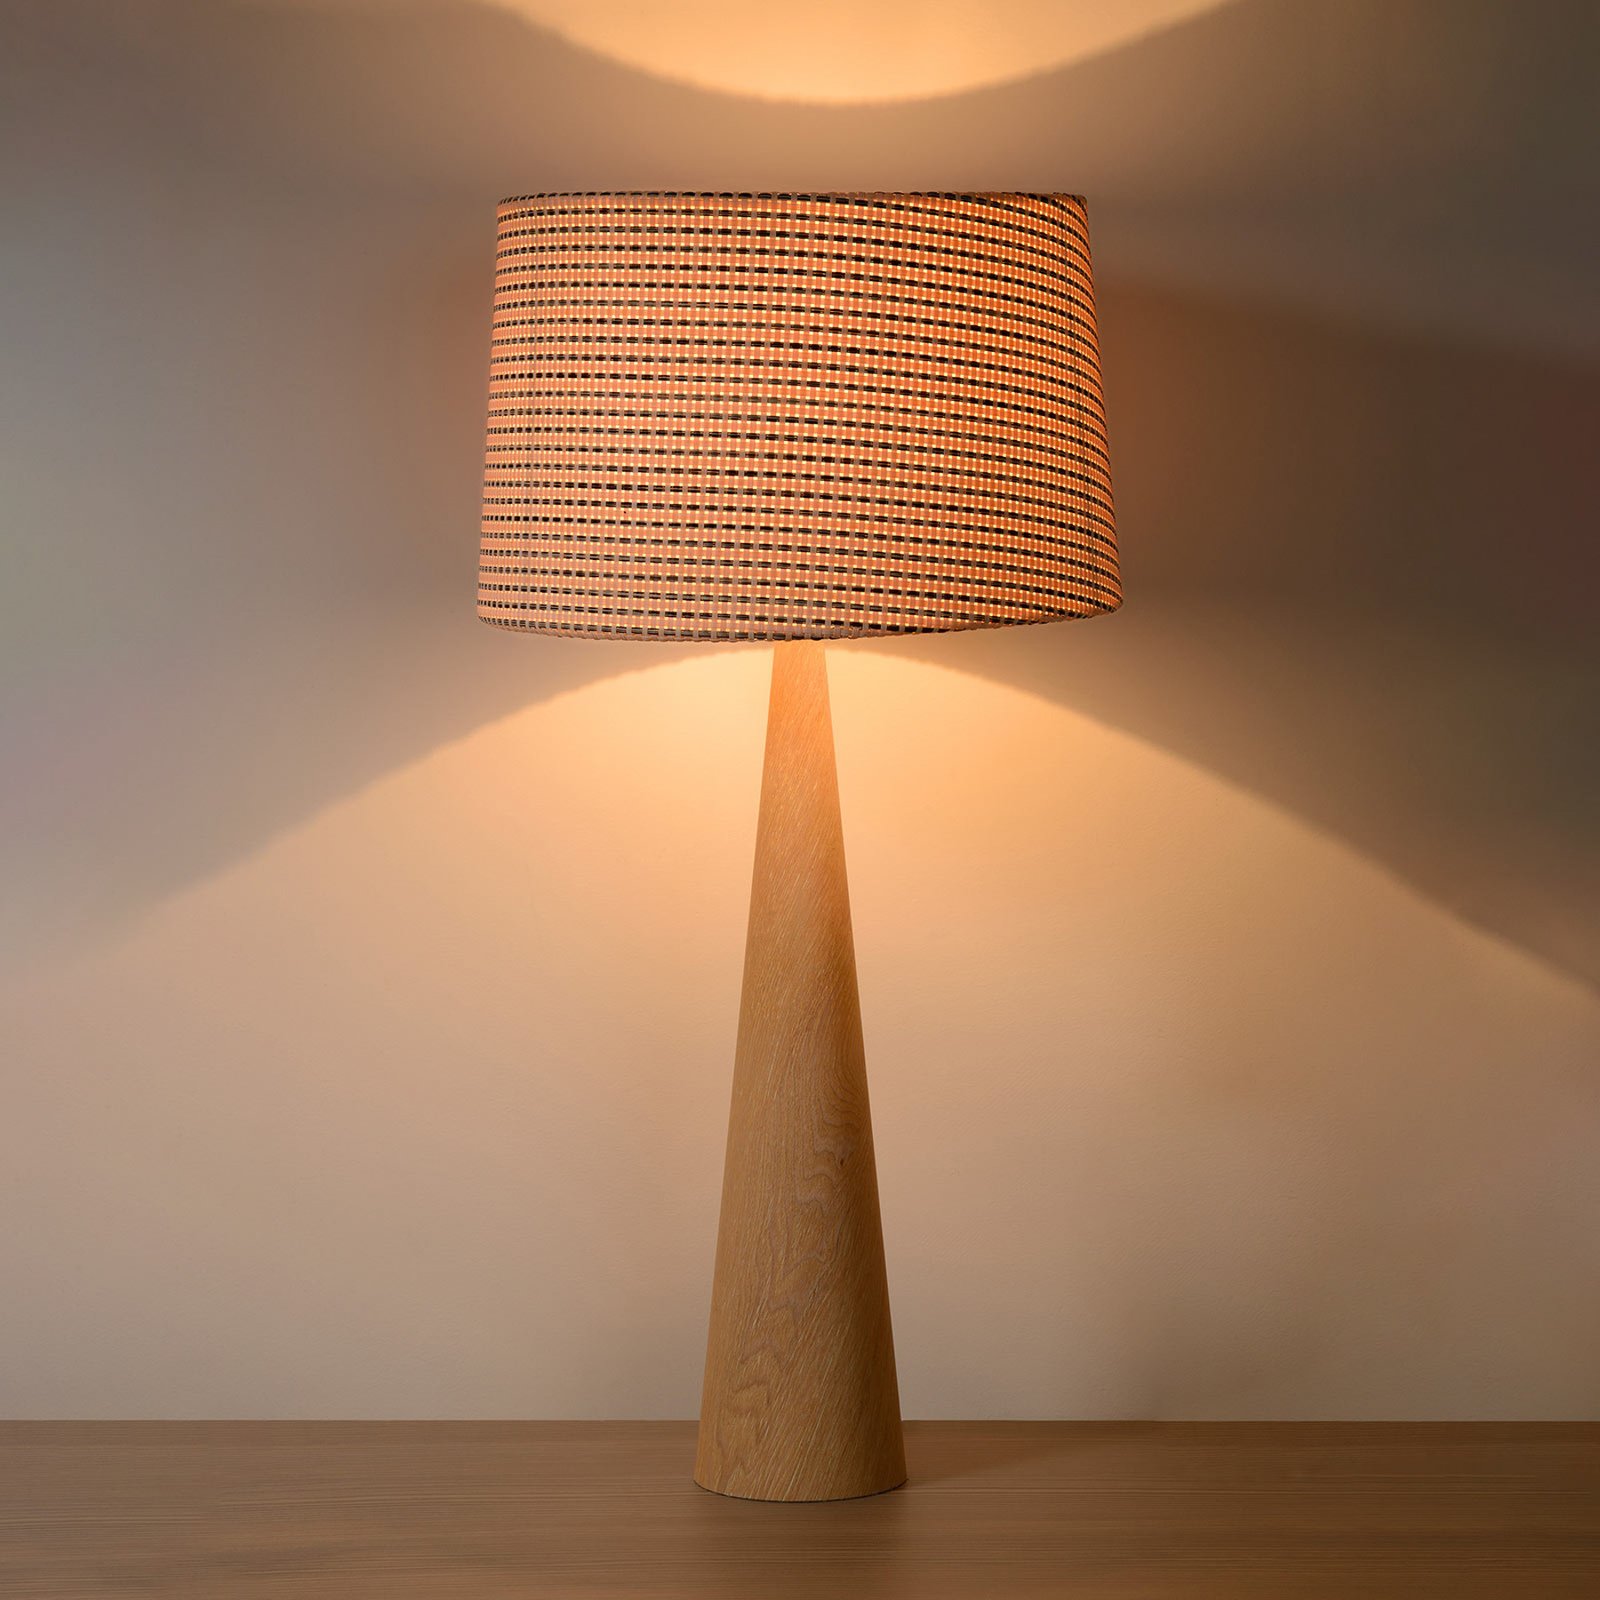 Conos table lamp with light-coloured wooden base